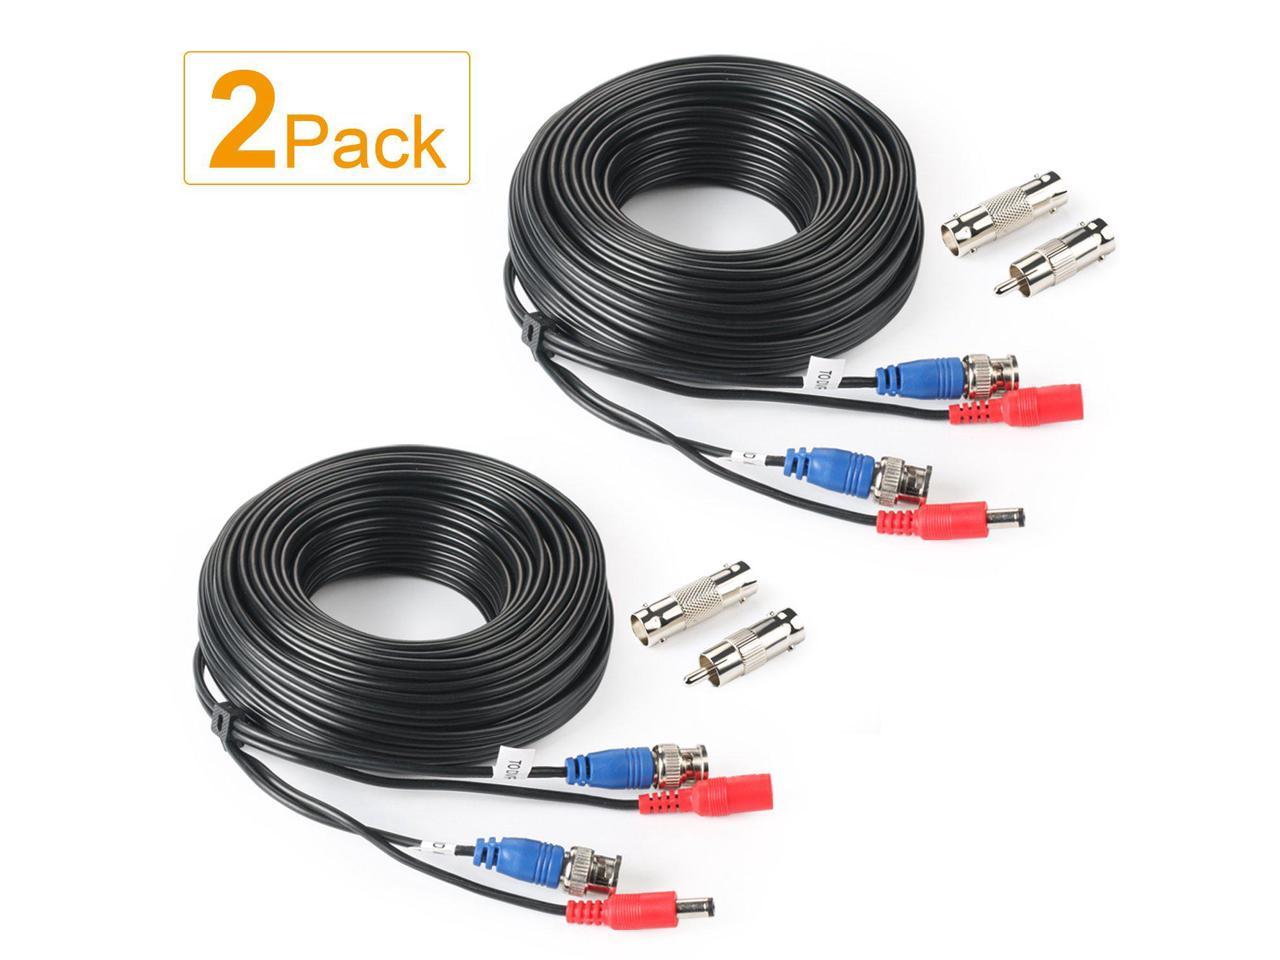 BNC Female and BNC to RCA SHD 2Pack 50Feet BNC Vedio Power Cable Pre-Made Al-in-One Camera Video BNC Cable Wire Cord for Surveillance CCTV Security System with Connectors